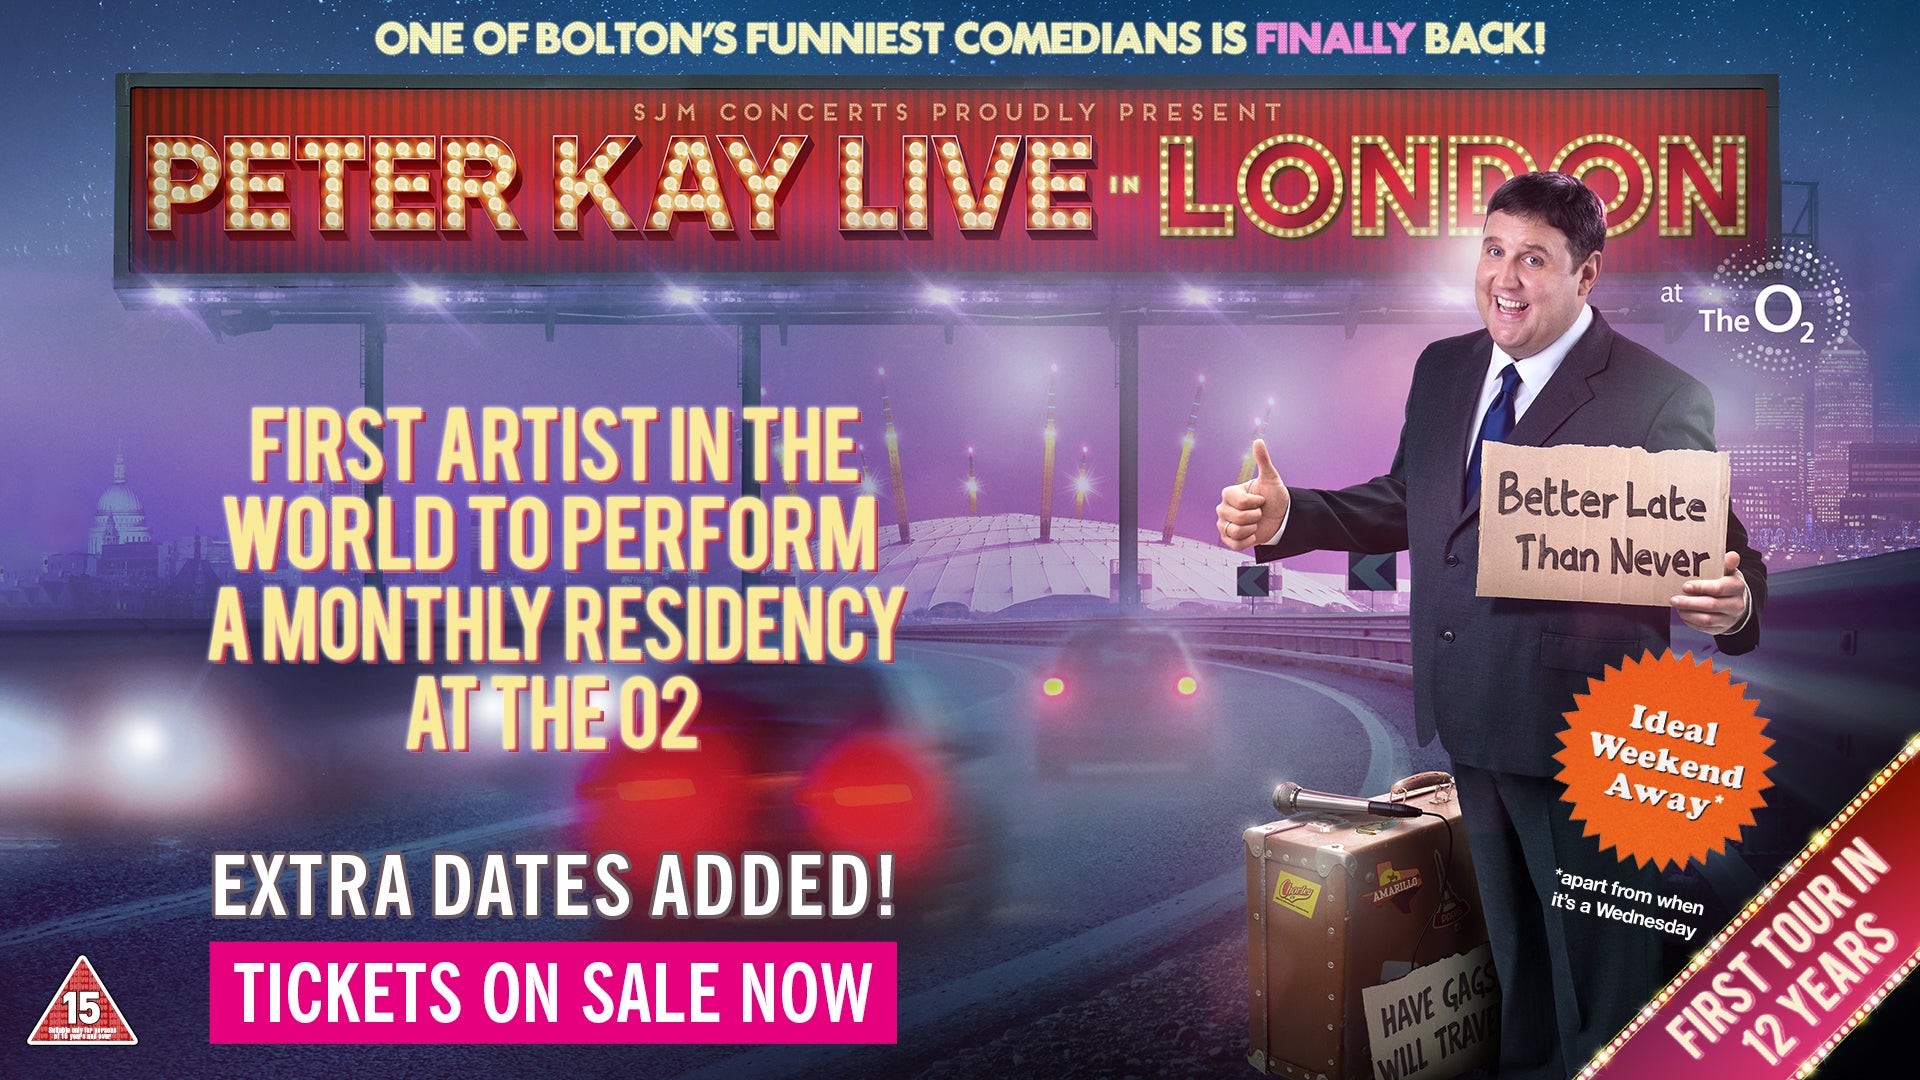 Promotional poster for comedian Peter Kay's live show in london at The O2 with him smiling, holding a thumbs up, and surrounded by colorful city graphics.